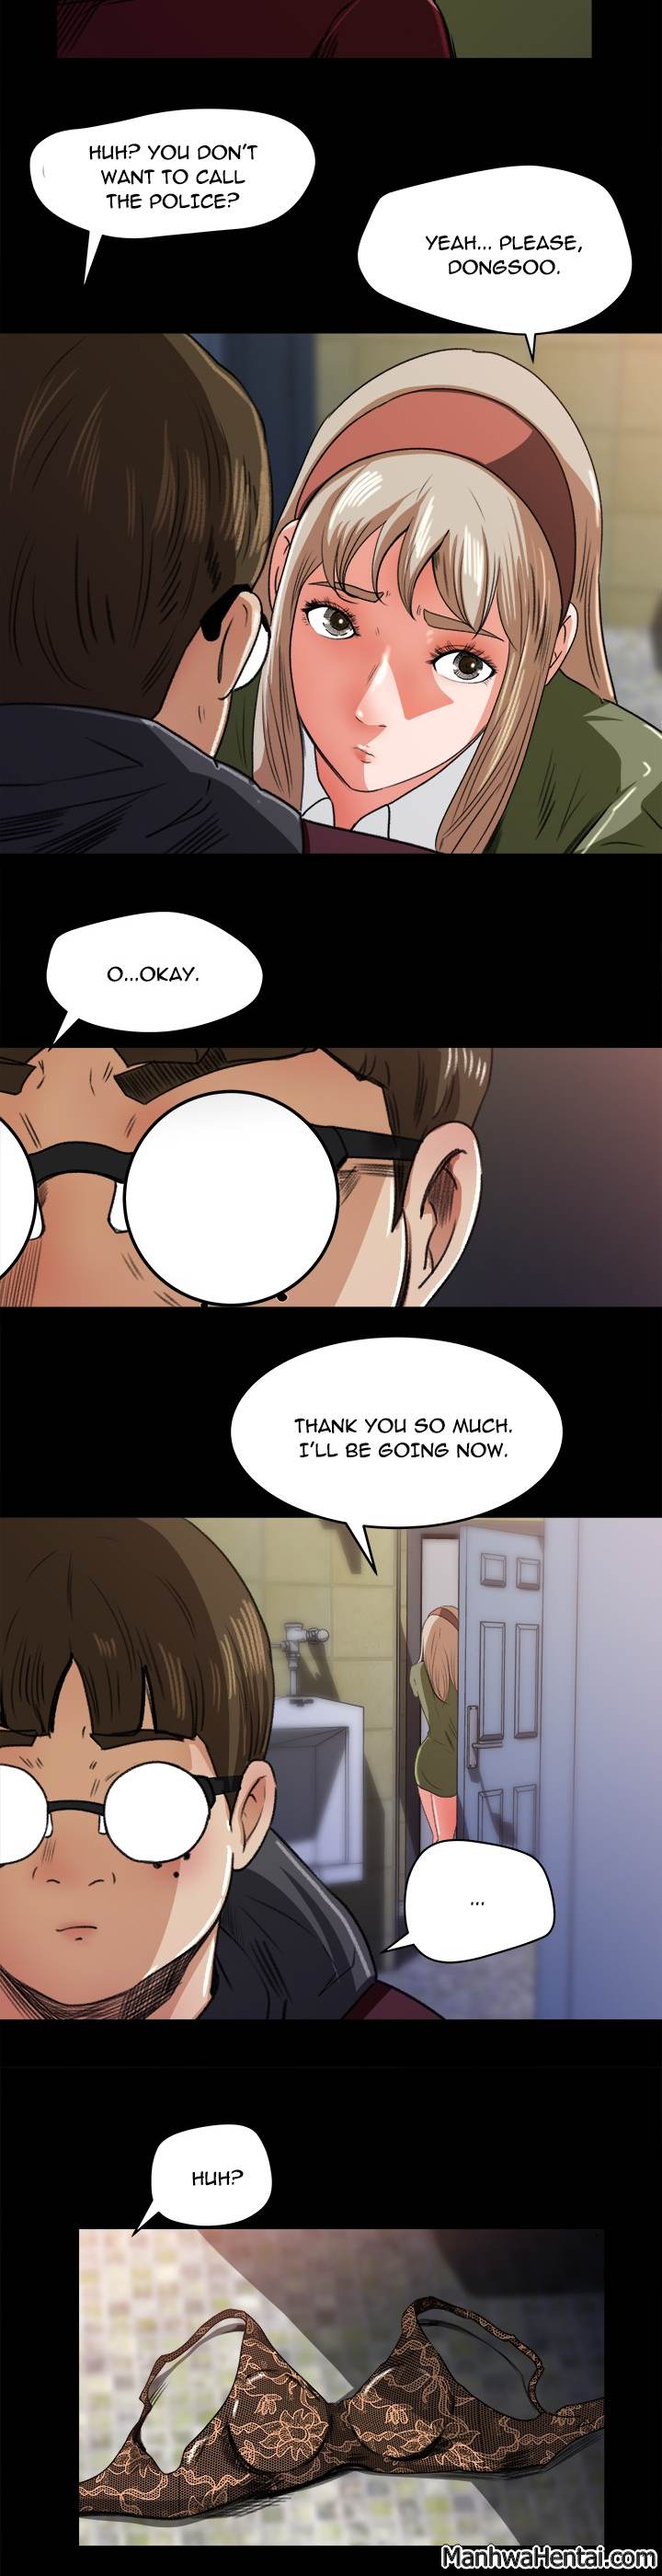 Inside the Uniform - Chapter 5 Page 25